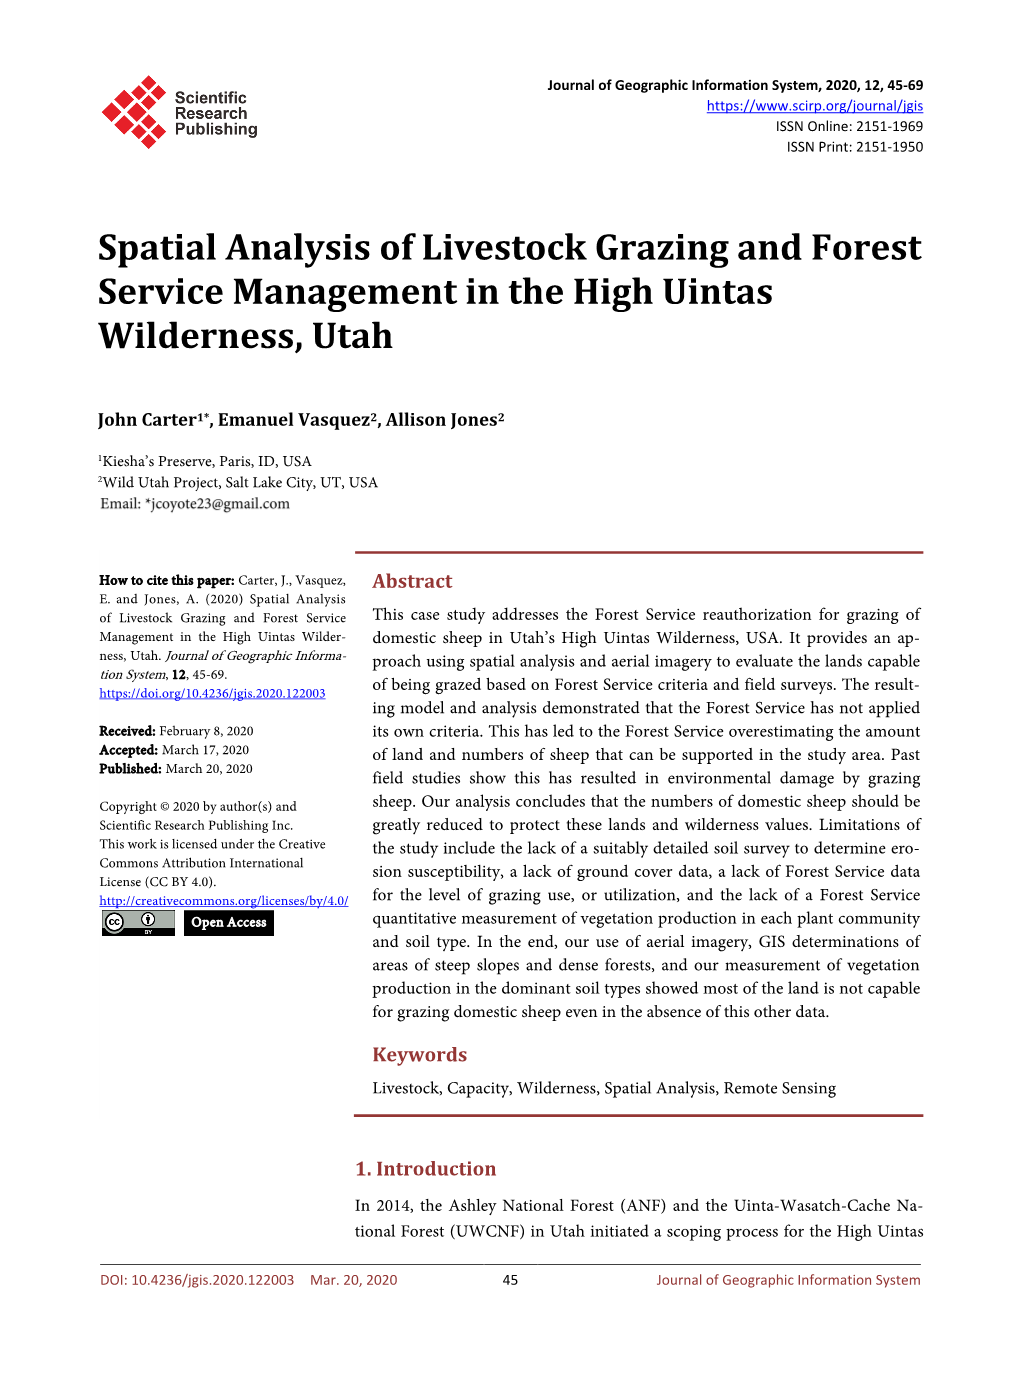 Spatial Analysis of Livestock Grazing and Forest Service Management in the High Uintas Wilderness, Utah